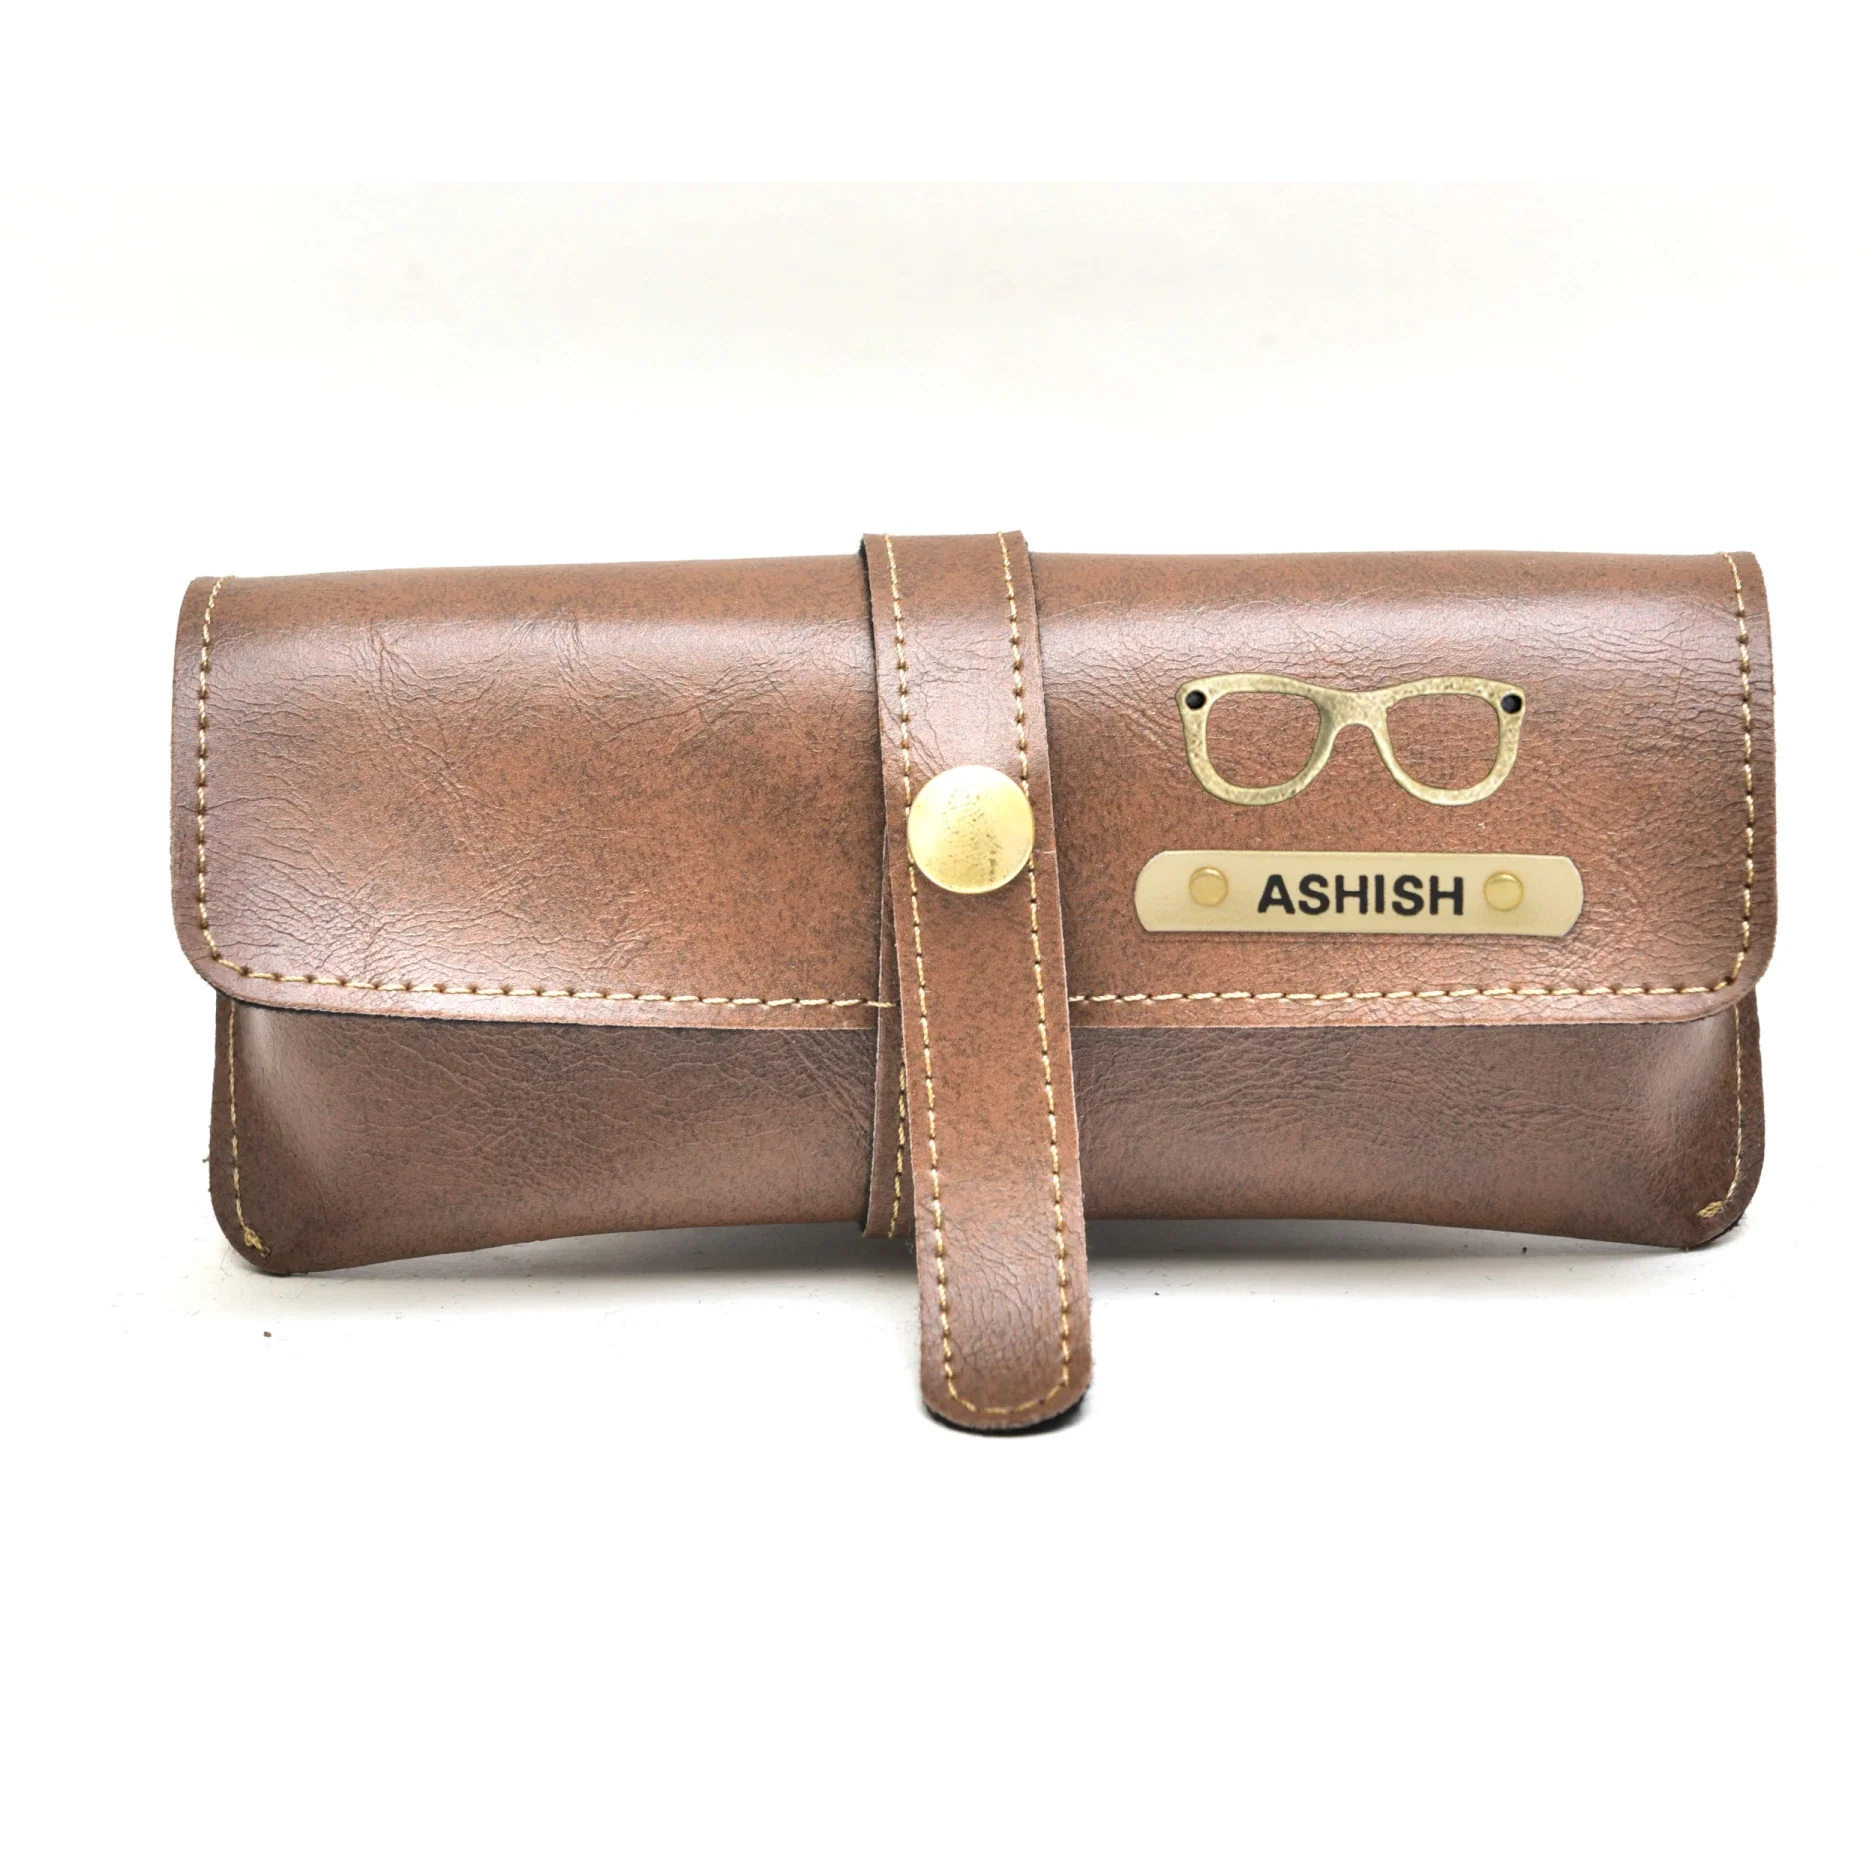 Our eyewear case is the perfect size for your purse or backpack, providing protection wherever you go.